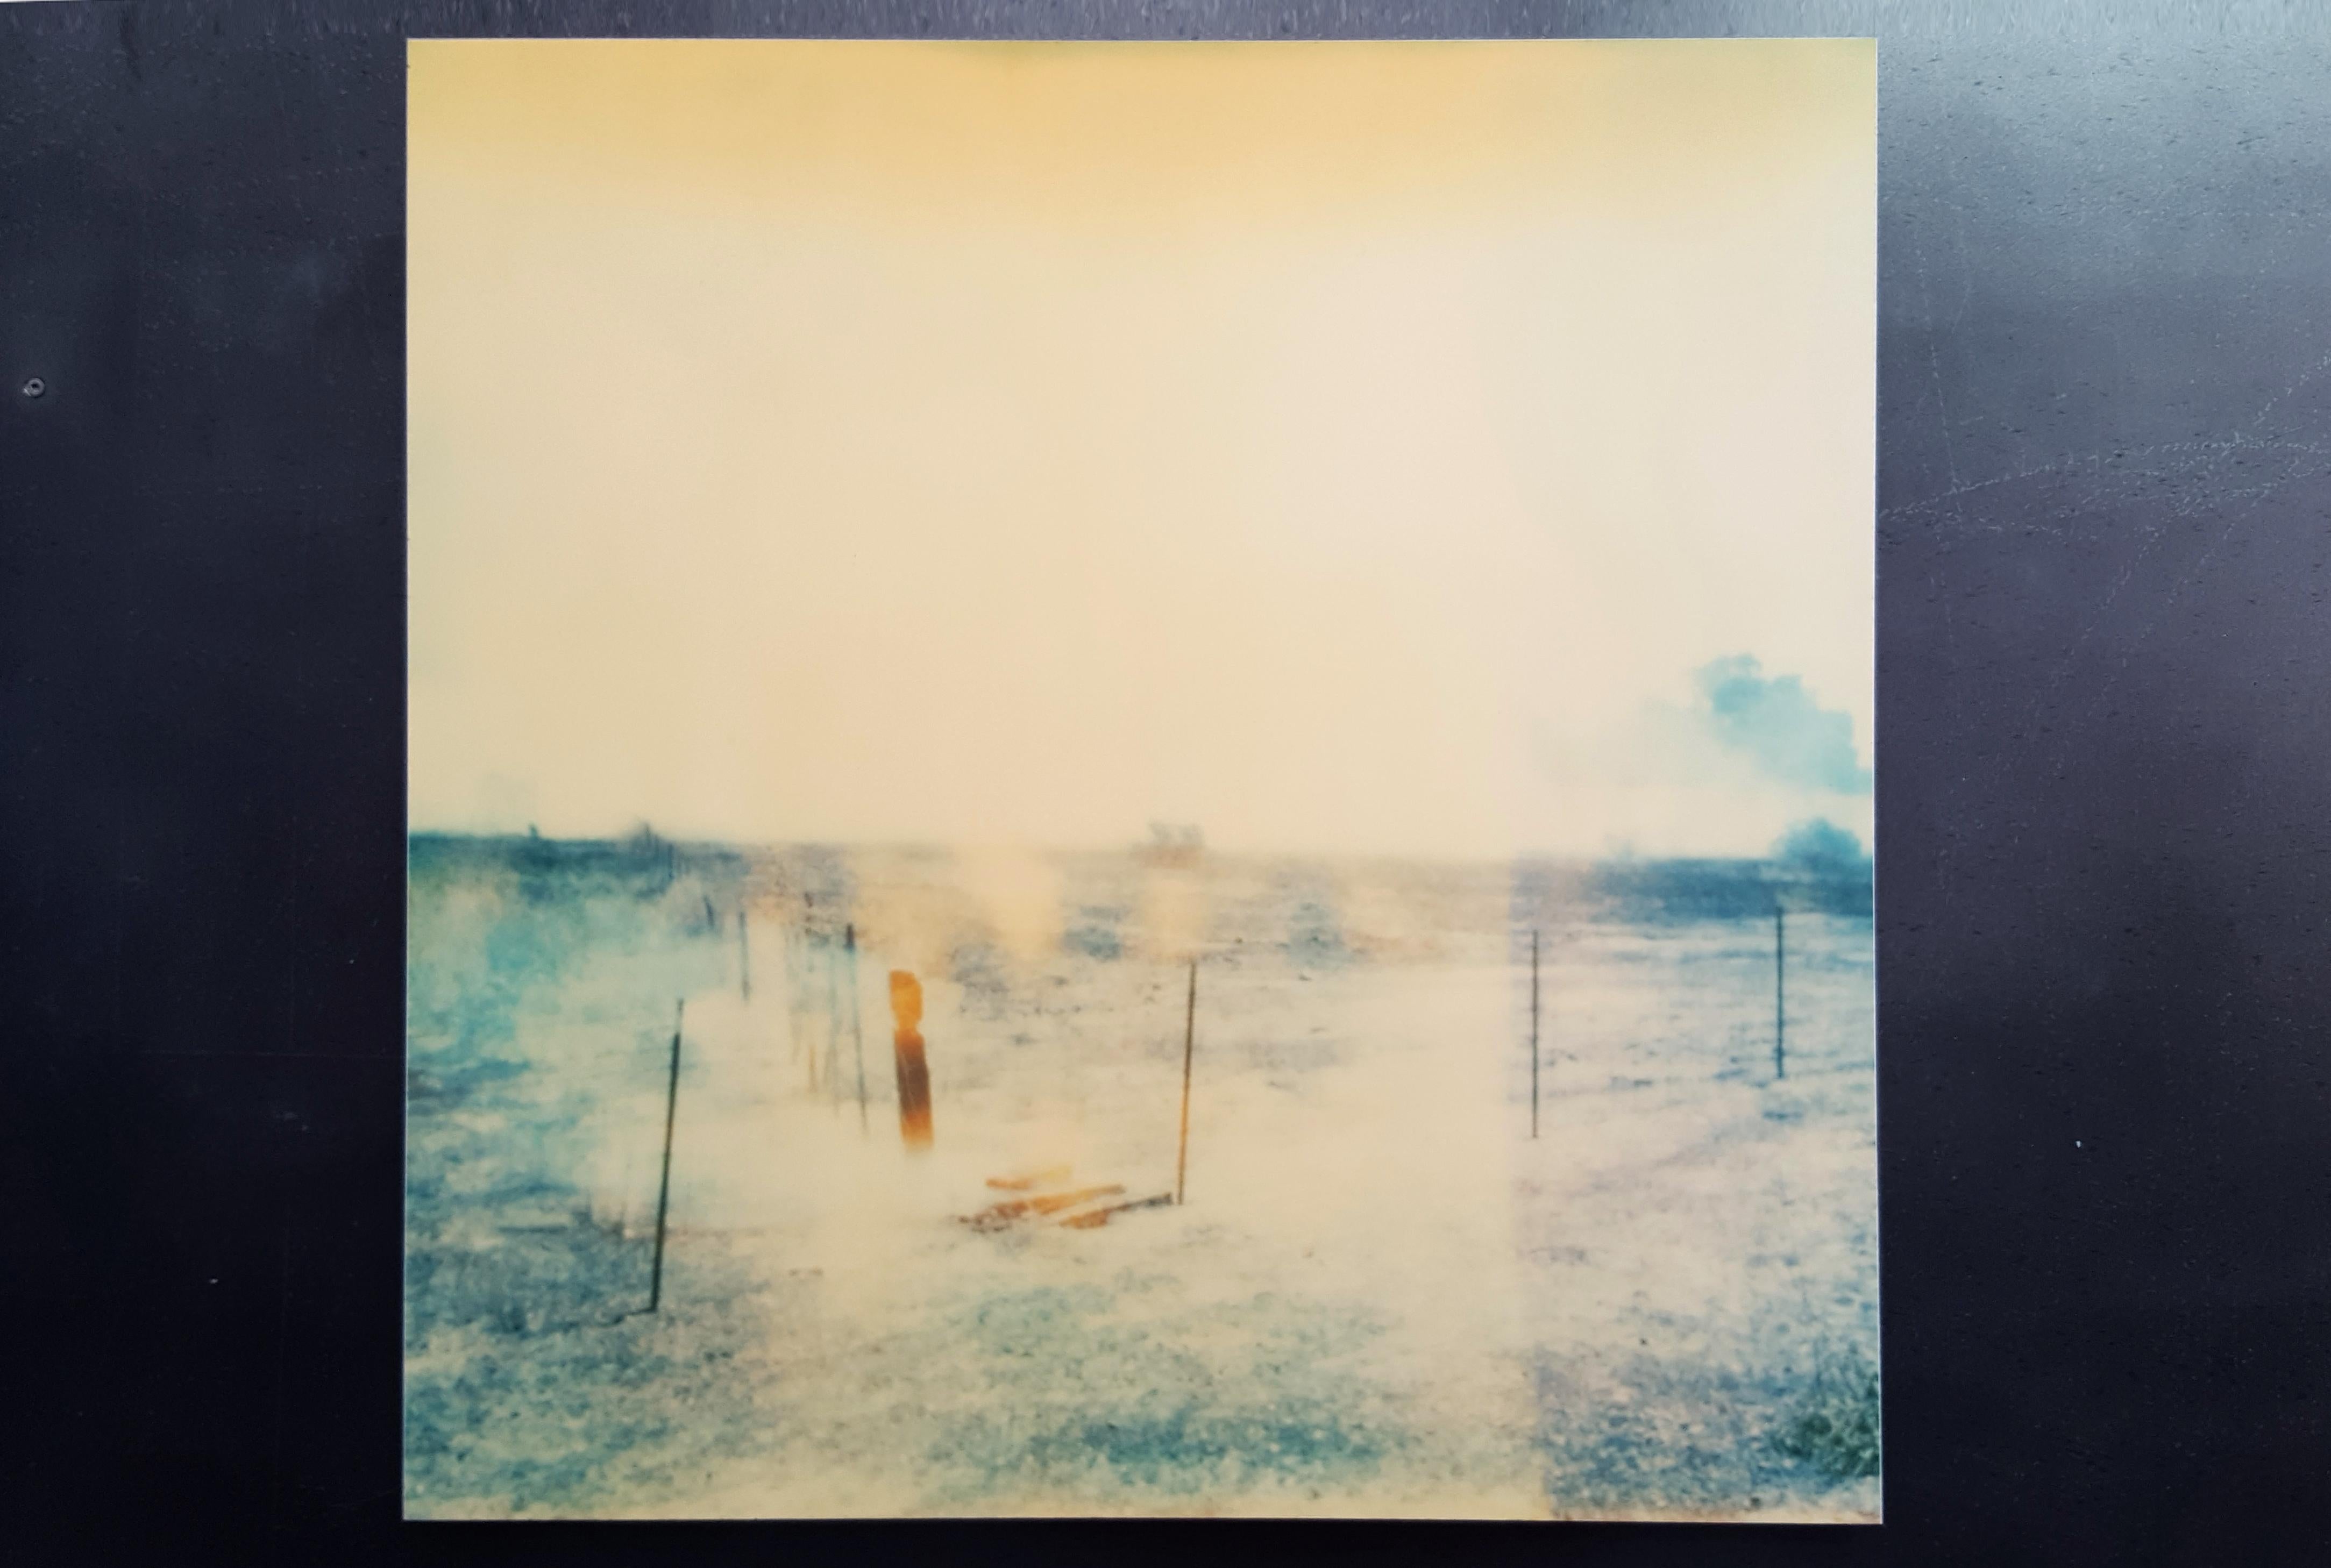 Burning Field III (Last Picture Show) - mounted - Polaroid, Contemporary - Photograph by Stefanie Schneider